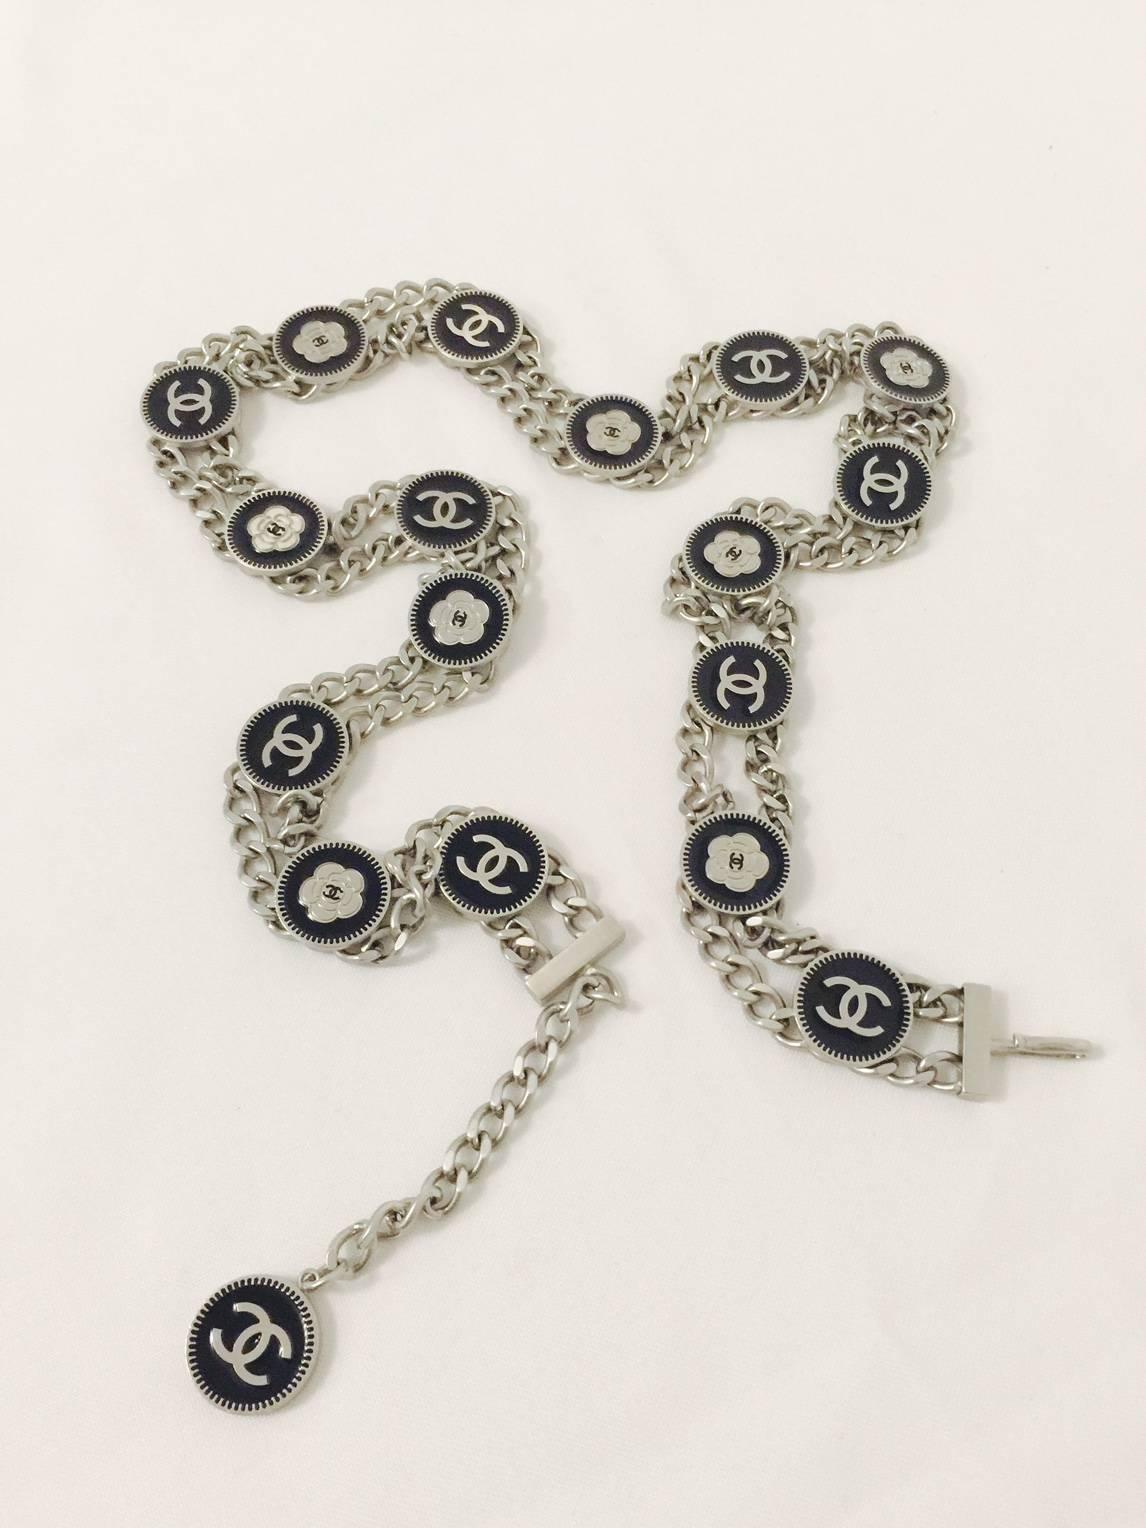 Chanel Spring 2006 Silver Tone Chain Belt is a wonderful alternative to the gold tone leather interwoven variety!  Features double chains connected by 17 black enamel medallions with embossed double 